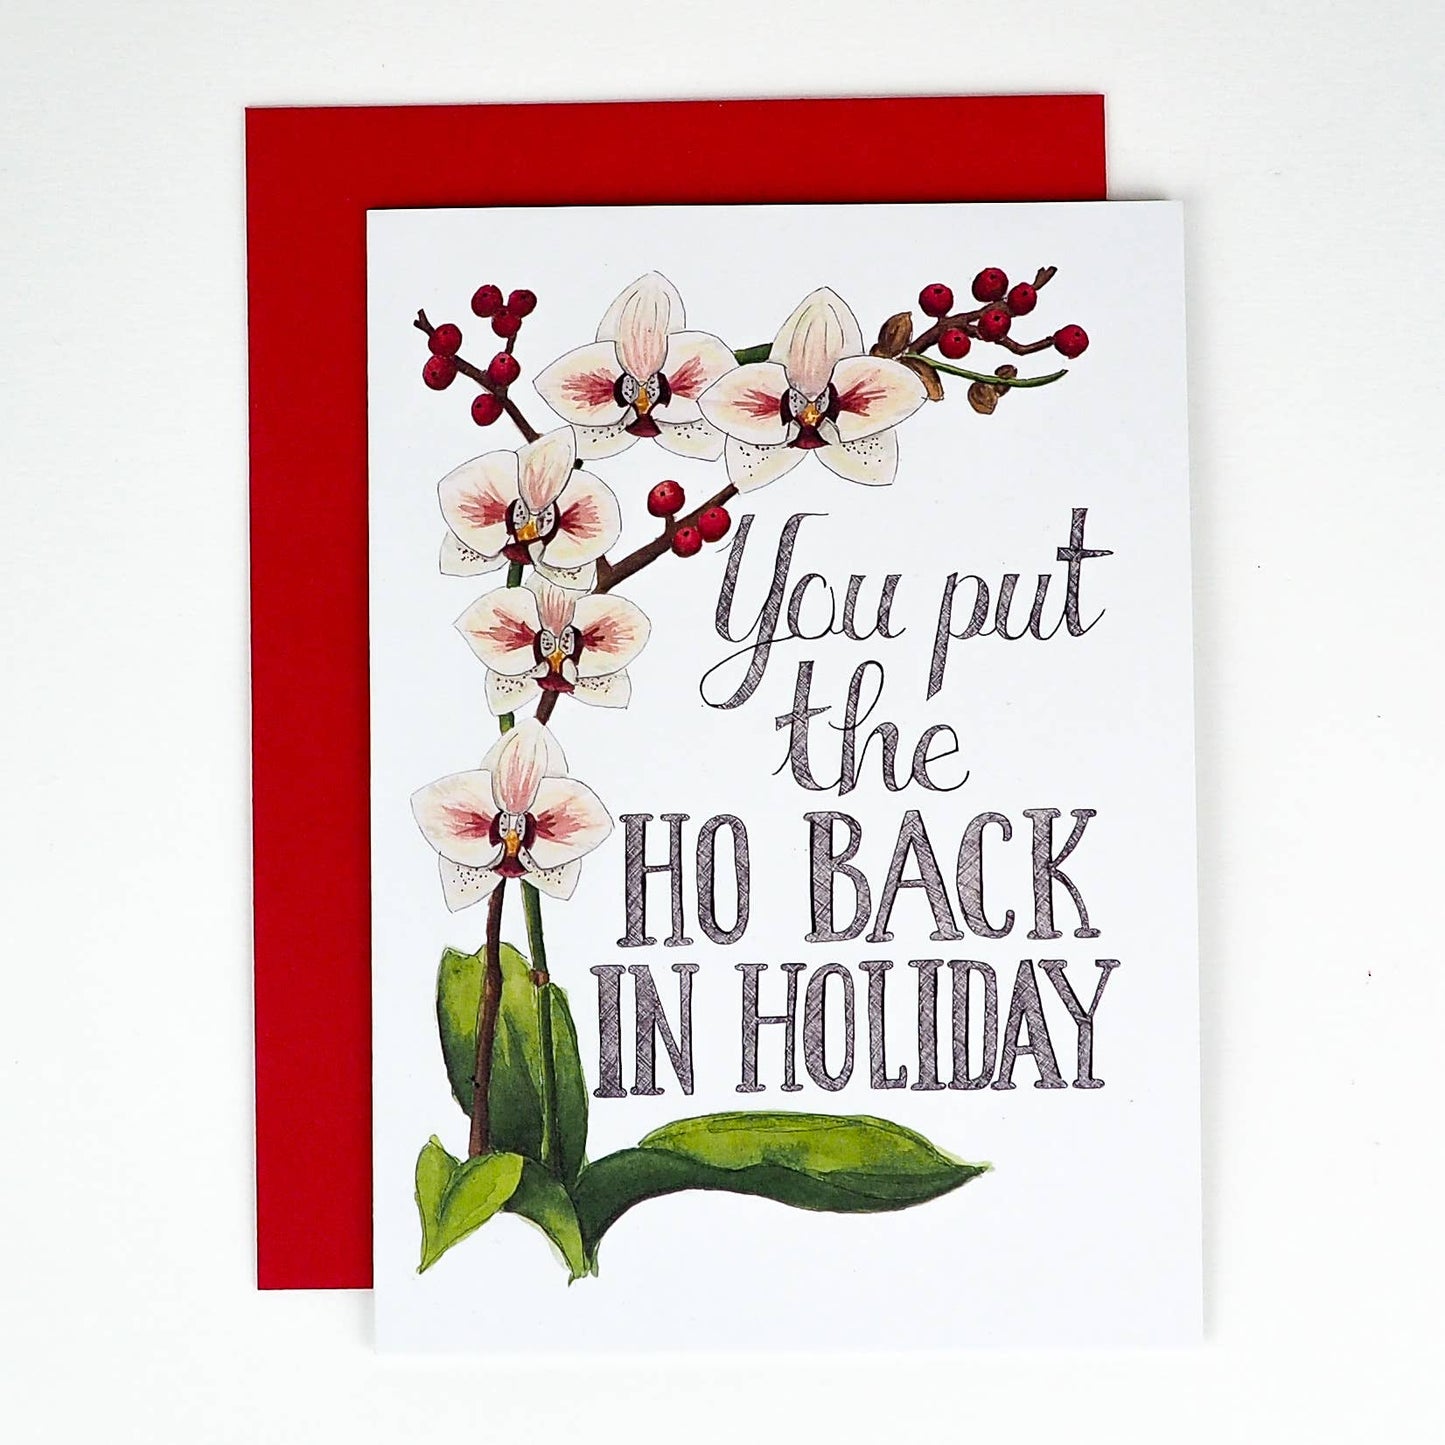 Plant Goals Plant Shop You Put The Ho Back In Holiday Card